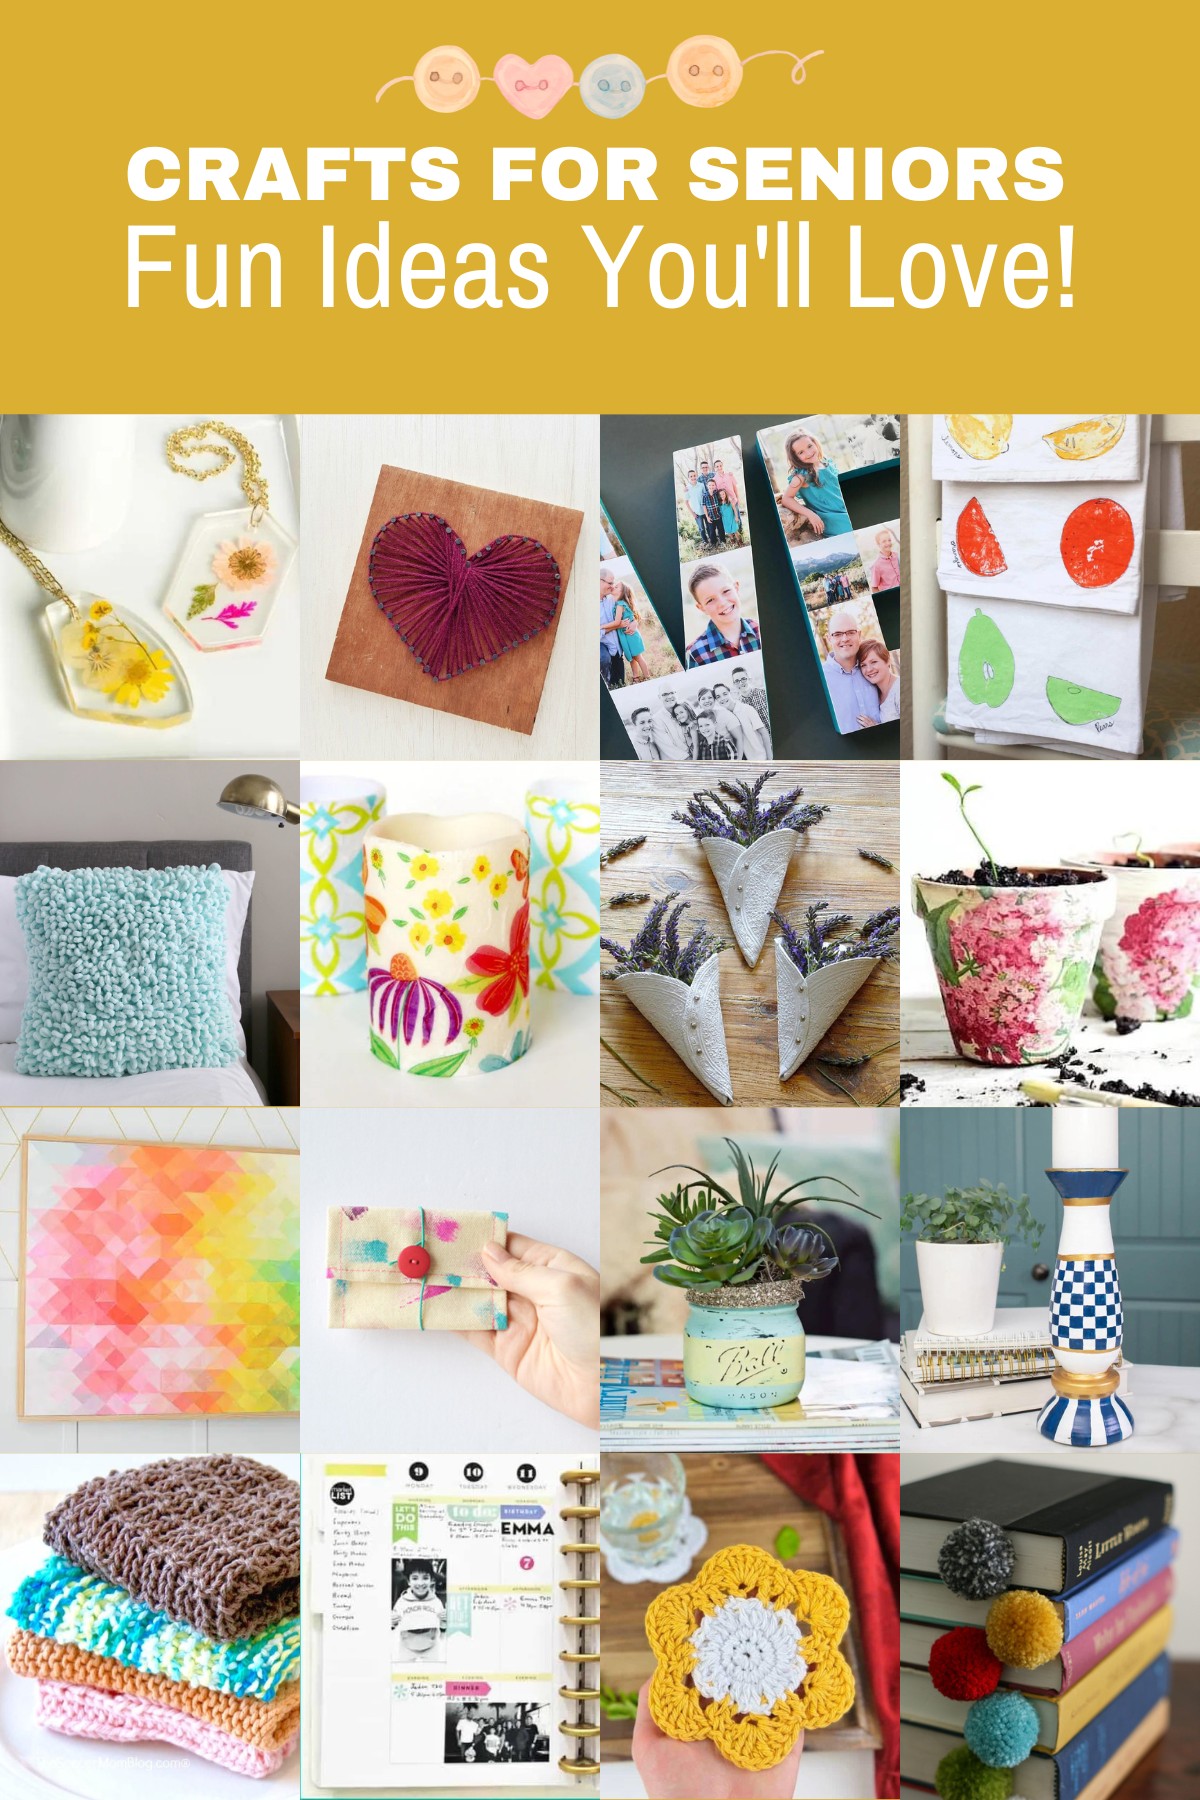 Crafts for Seniors: Fun & Functional Ideas You’ll Love!